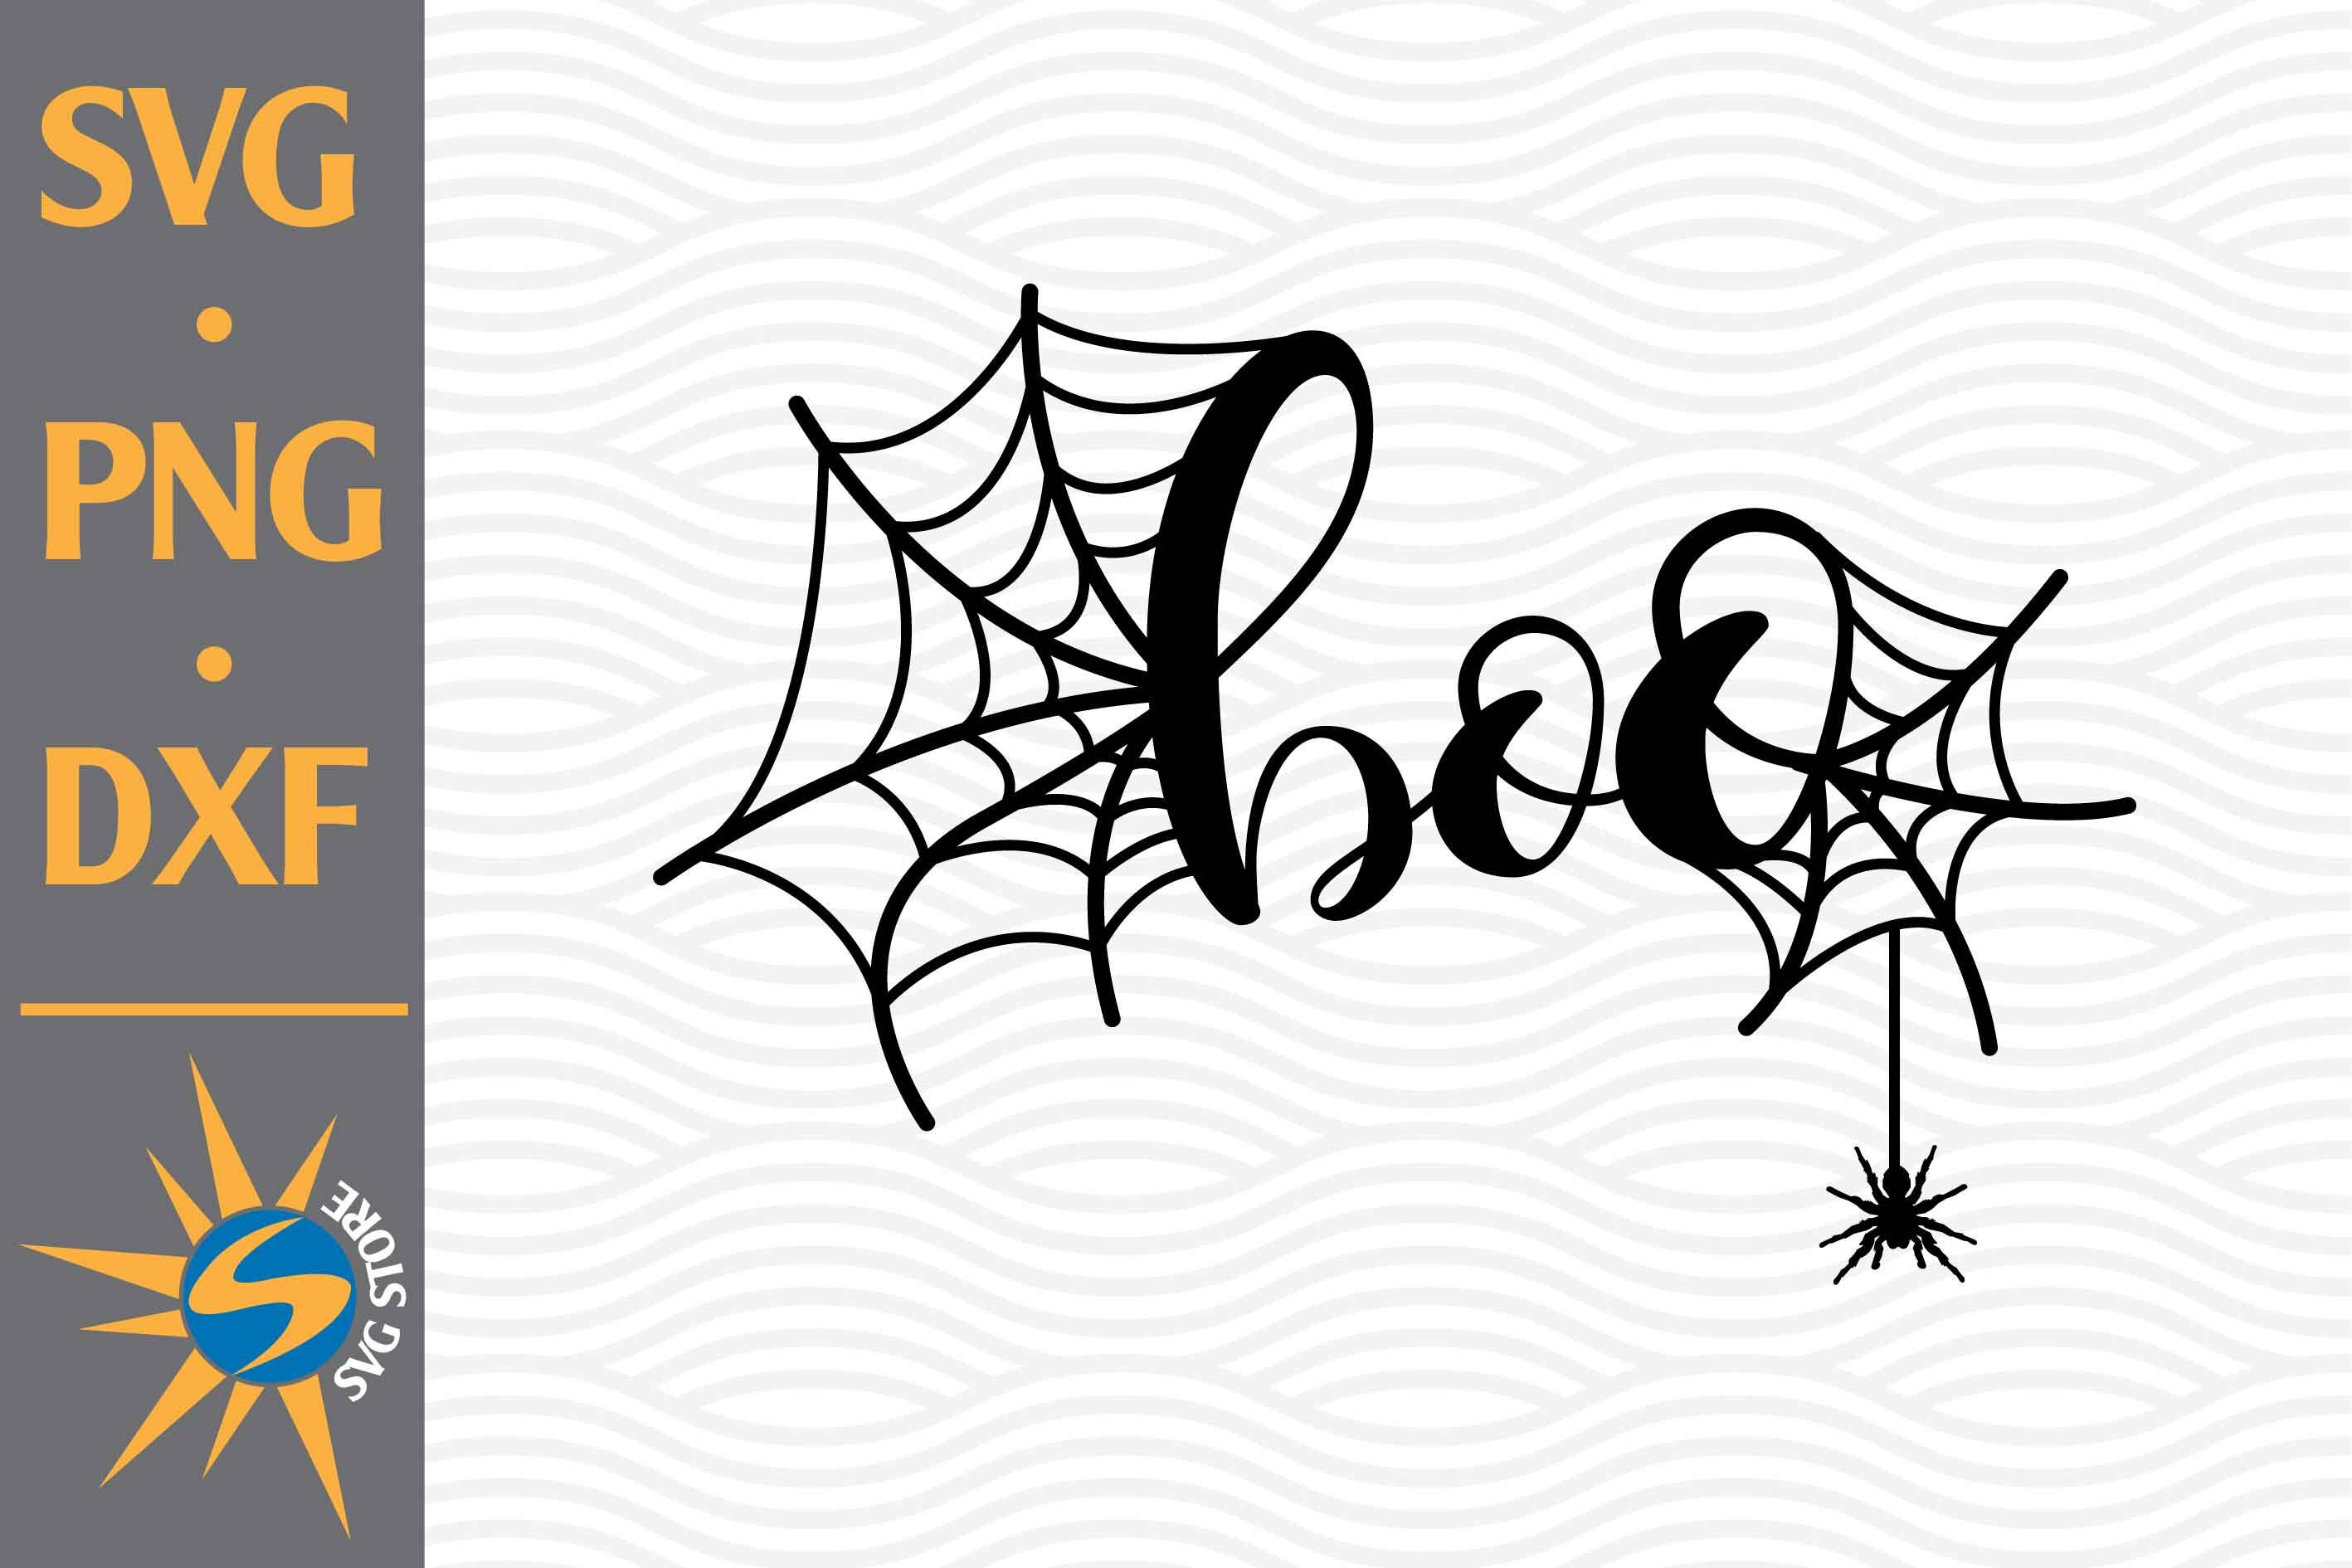 Boo SVG, PNG, DXF Digital Files Include By SVGStoreShop | TheHungryJPEG